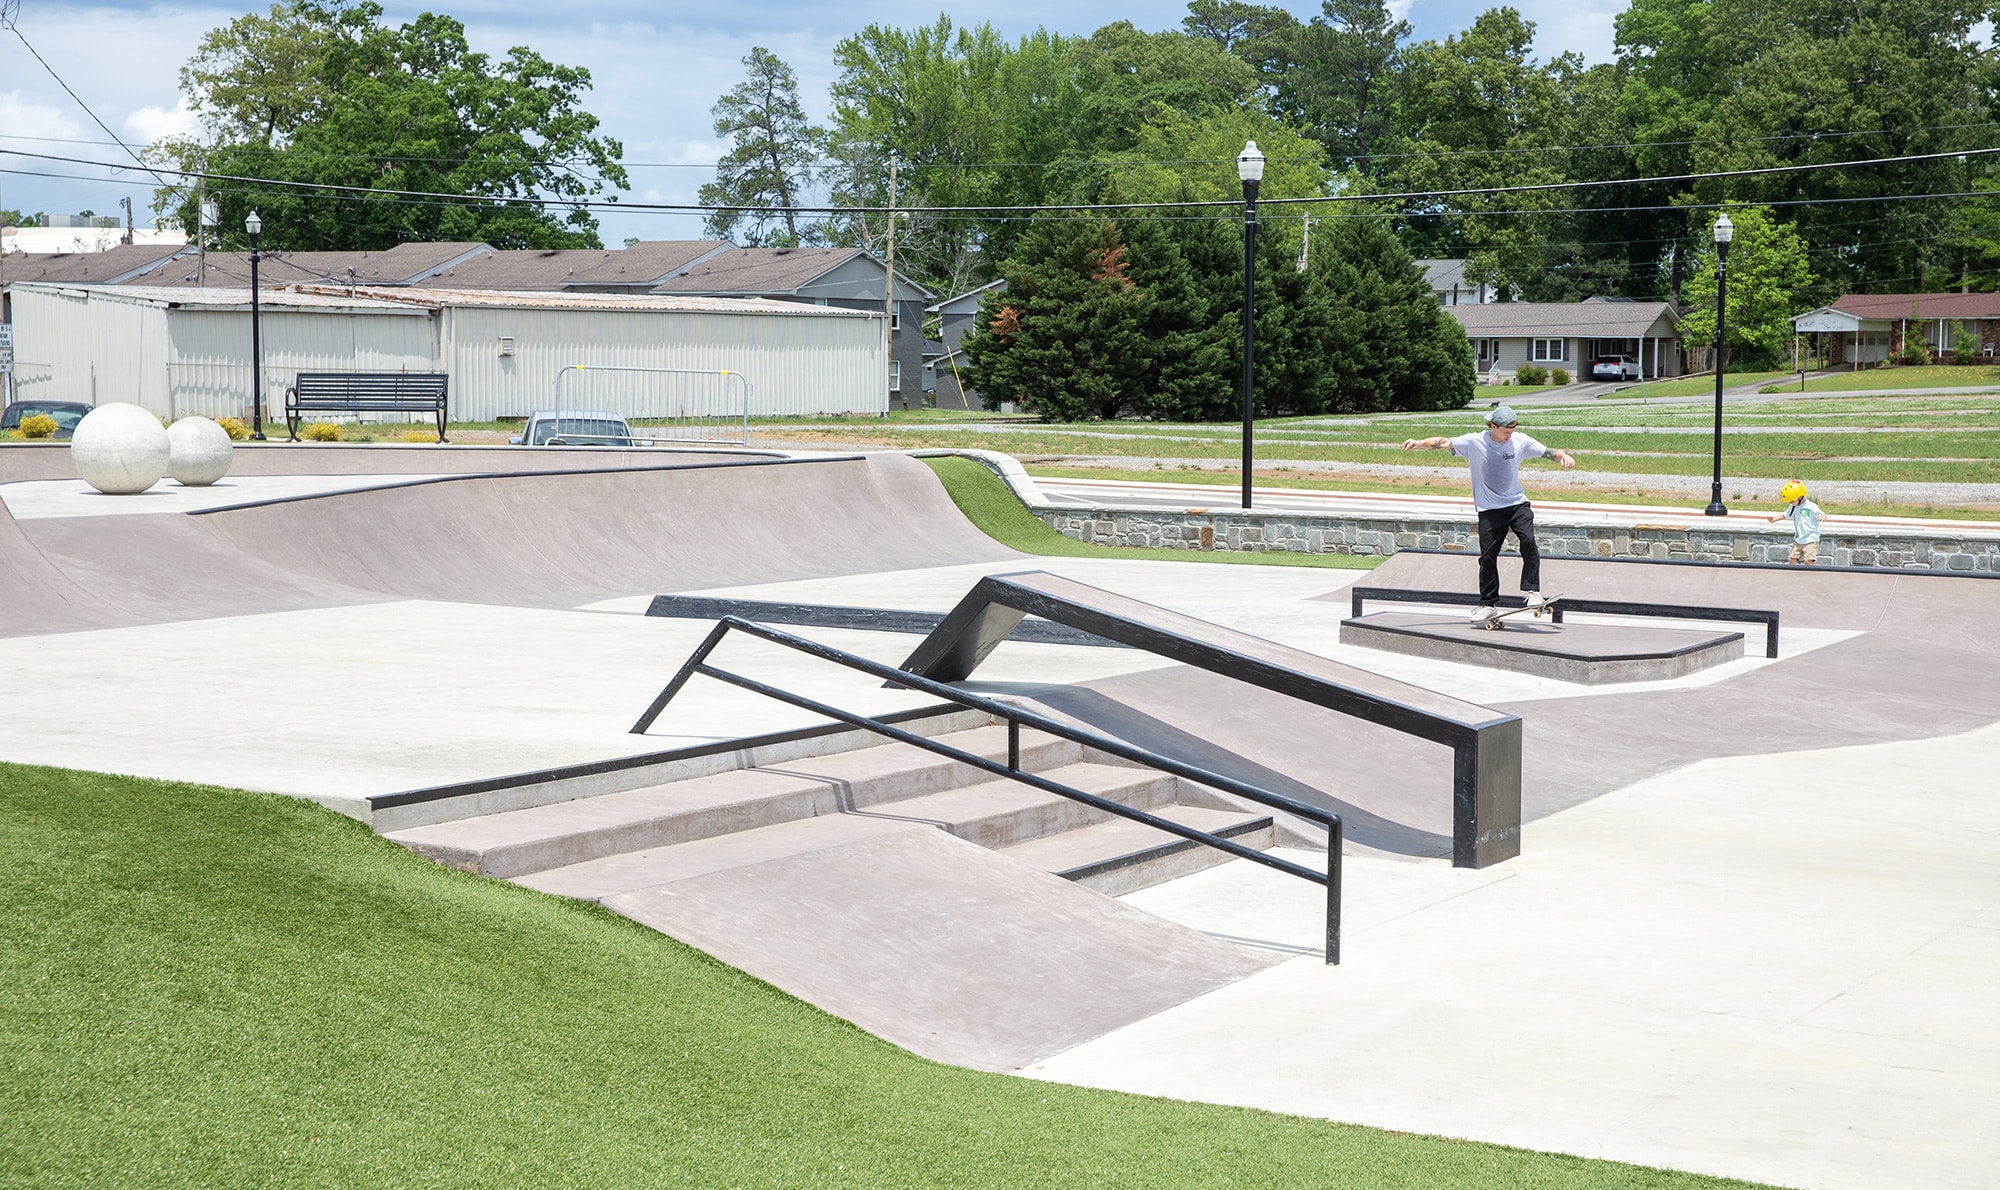 Cullman Skatepark's Manny Pad in Alabama with handrail and hubba in the foreground with a skateboard bowl in the back